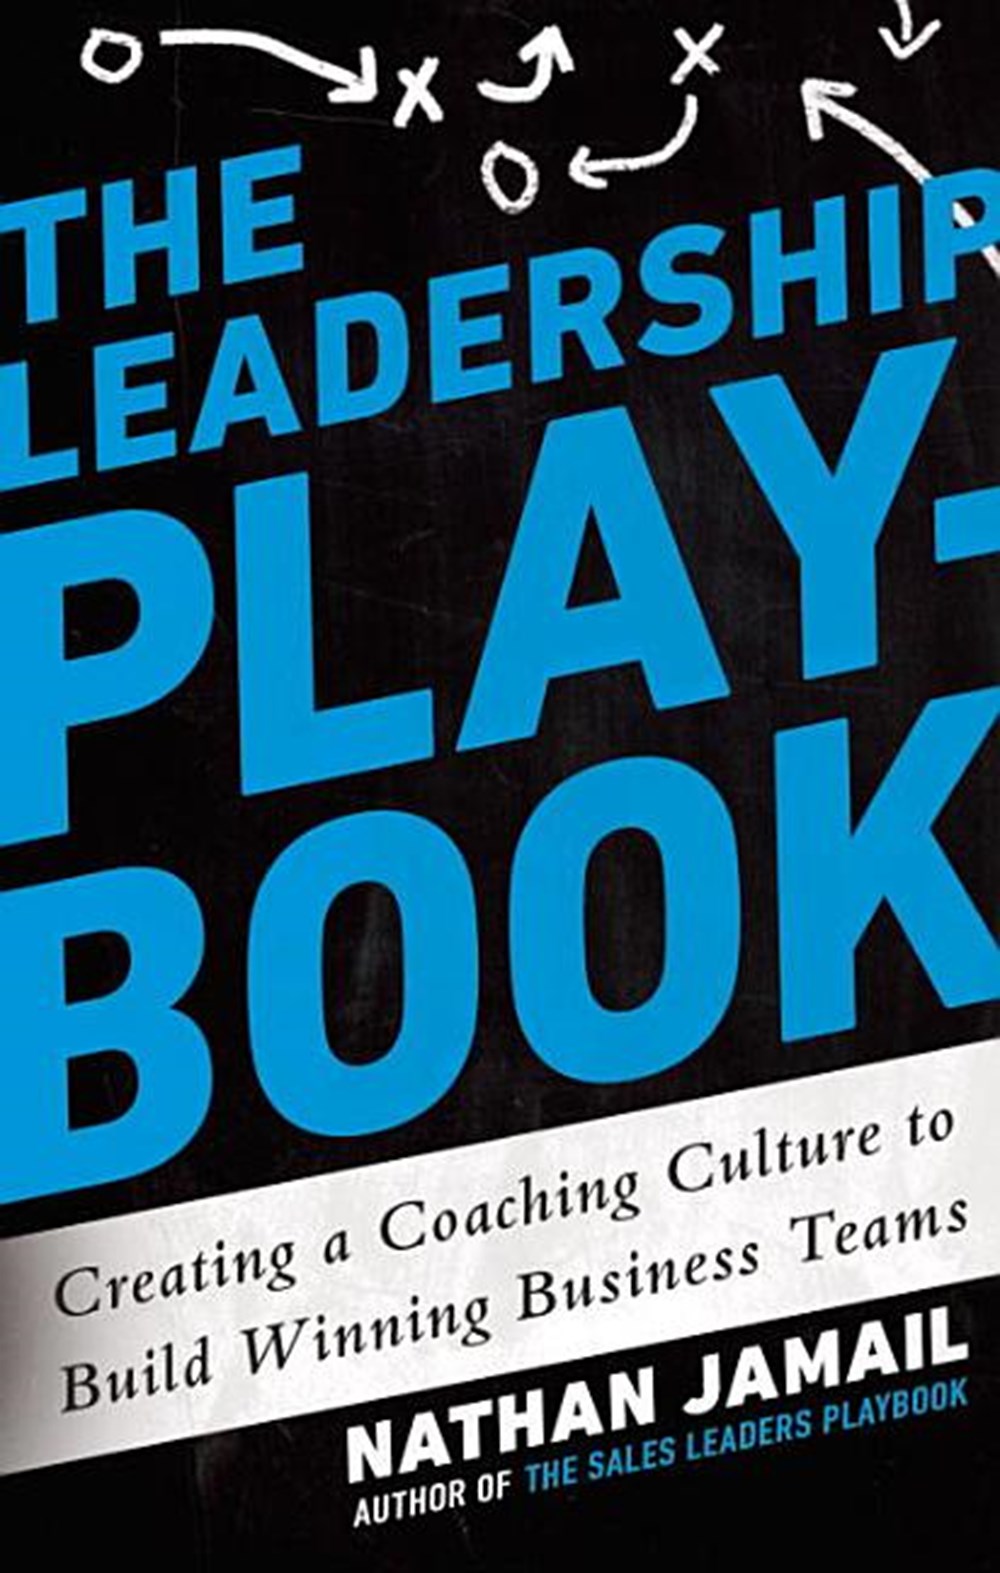 Leadership Playbook: Creating a Coaching Culture to Build Winning Business Teams